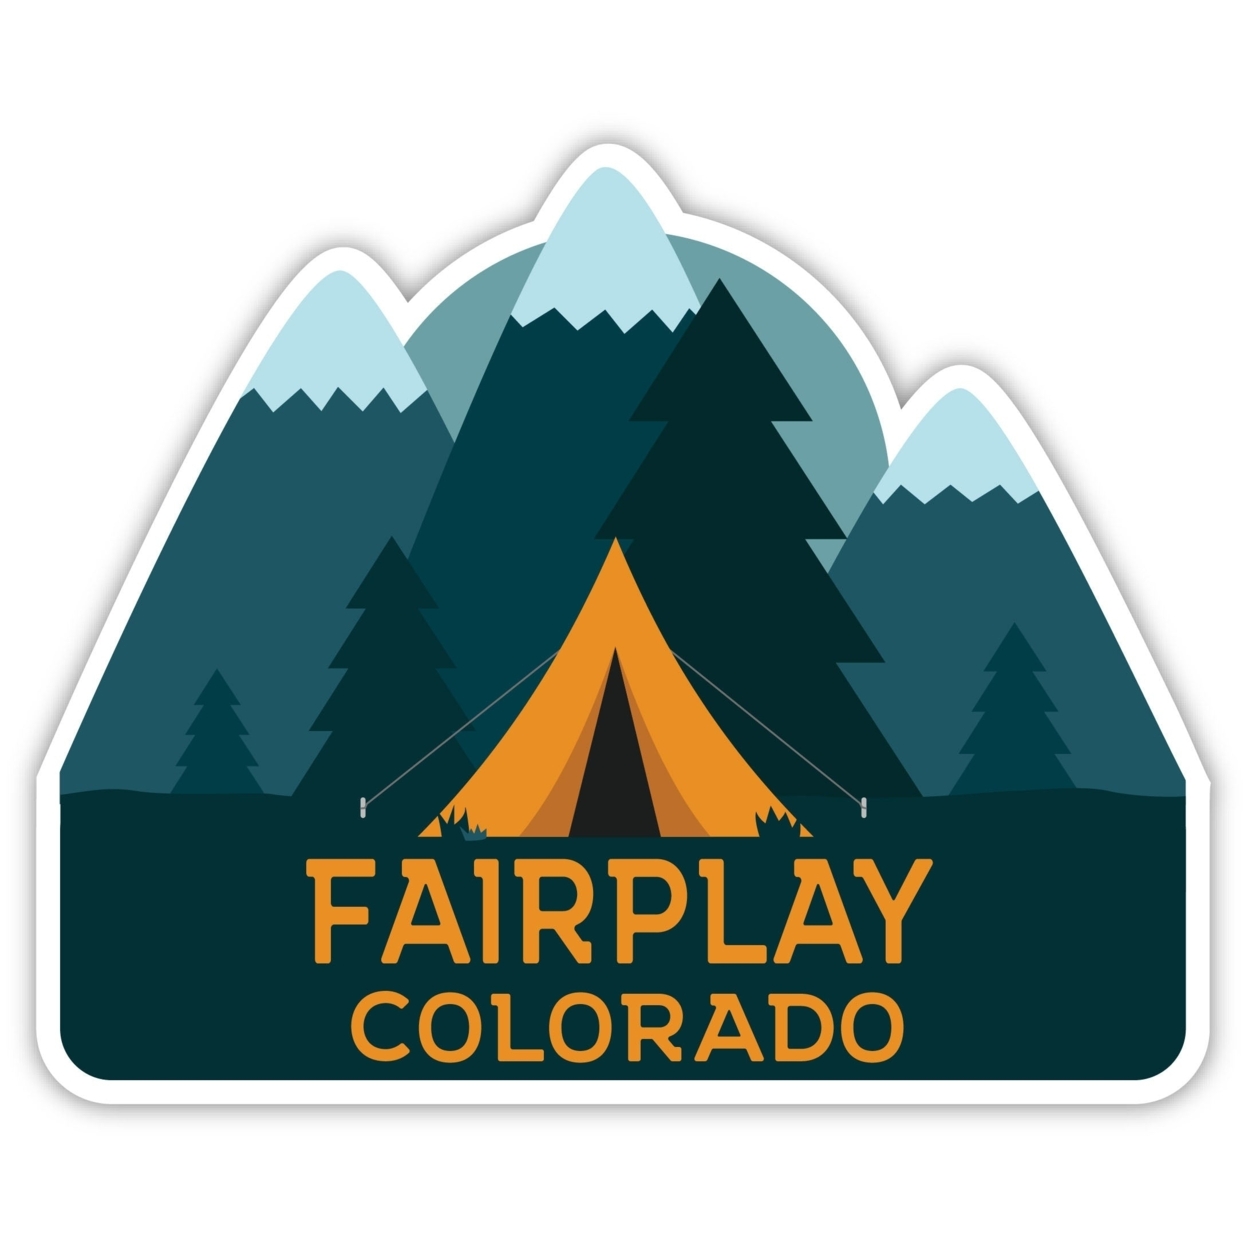 Fairplay Colorado Souvenir Decorative Stickers (Choose Theme And Size) - 4-Pack, 10-Inch, Adventures Awaits